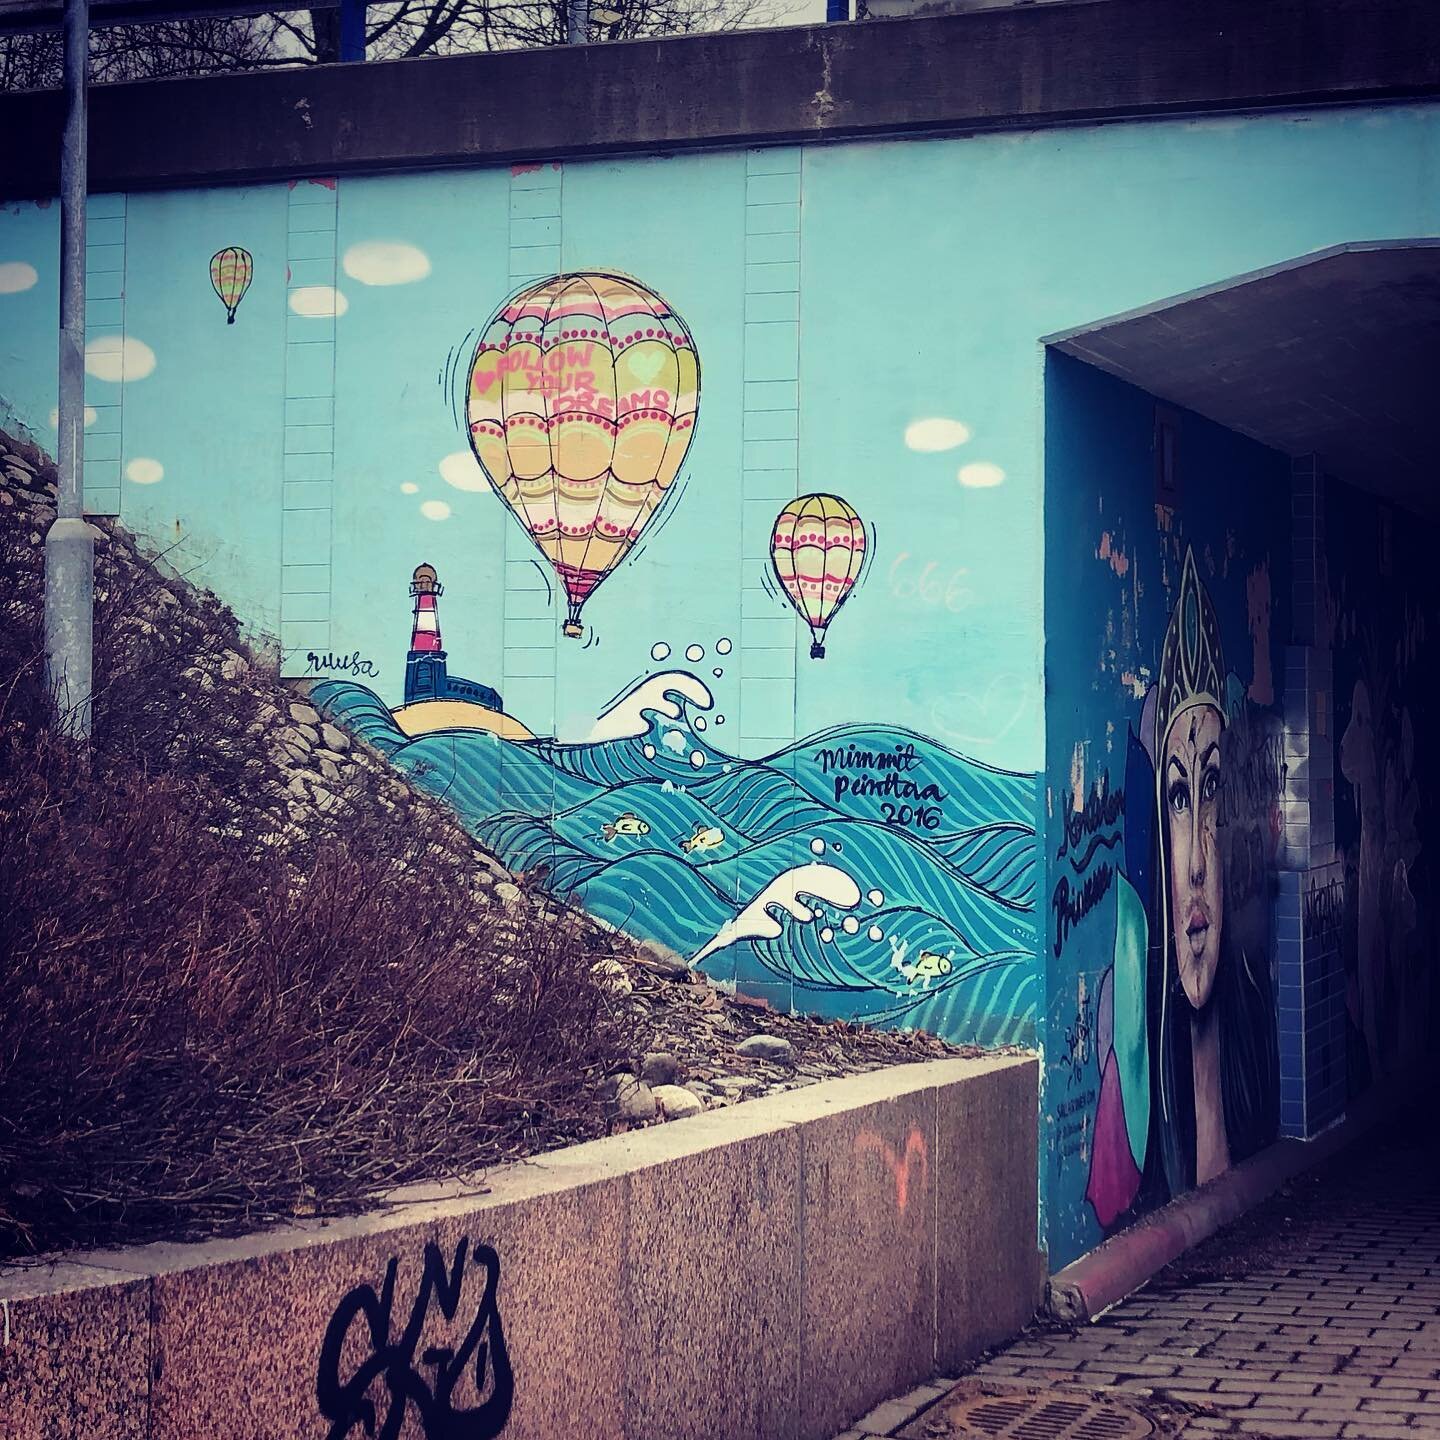 Throwback Tuesday 👷🏼&zwj;♀️ Our underpass paintings in Kontula since 2016 ⭐️ #mimmitpeinttaa2016 #ruusaart #ruusa #redy #mimmitpeinttaa #ruusaartandproduction